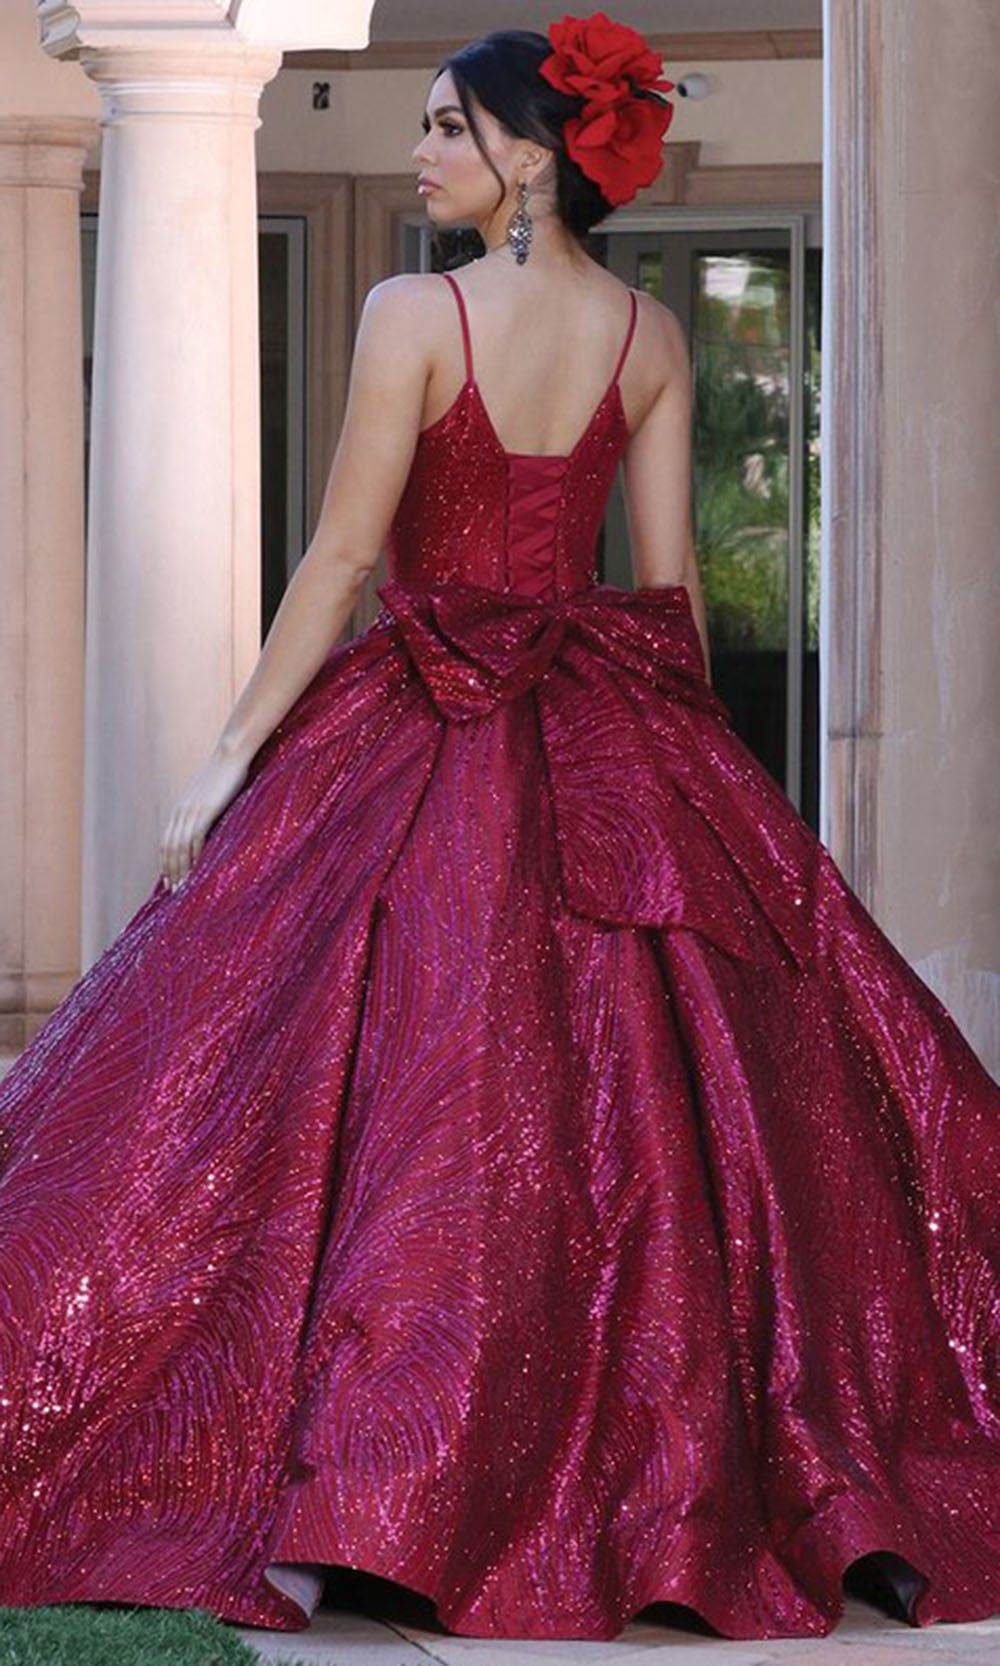 Dancing Queen - 1447 Glitter Bow Accented Back Ballgown In Burgundy